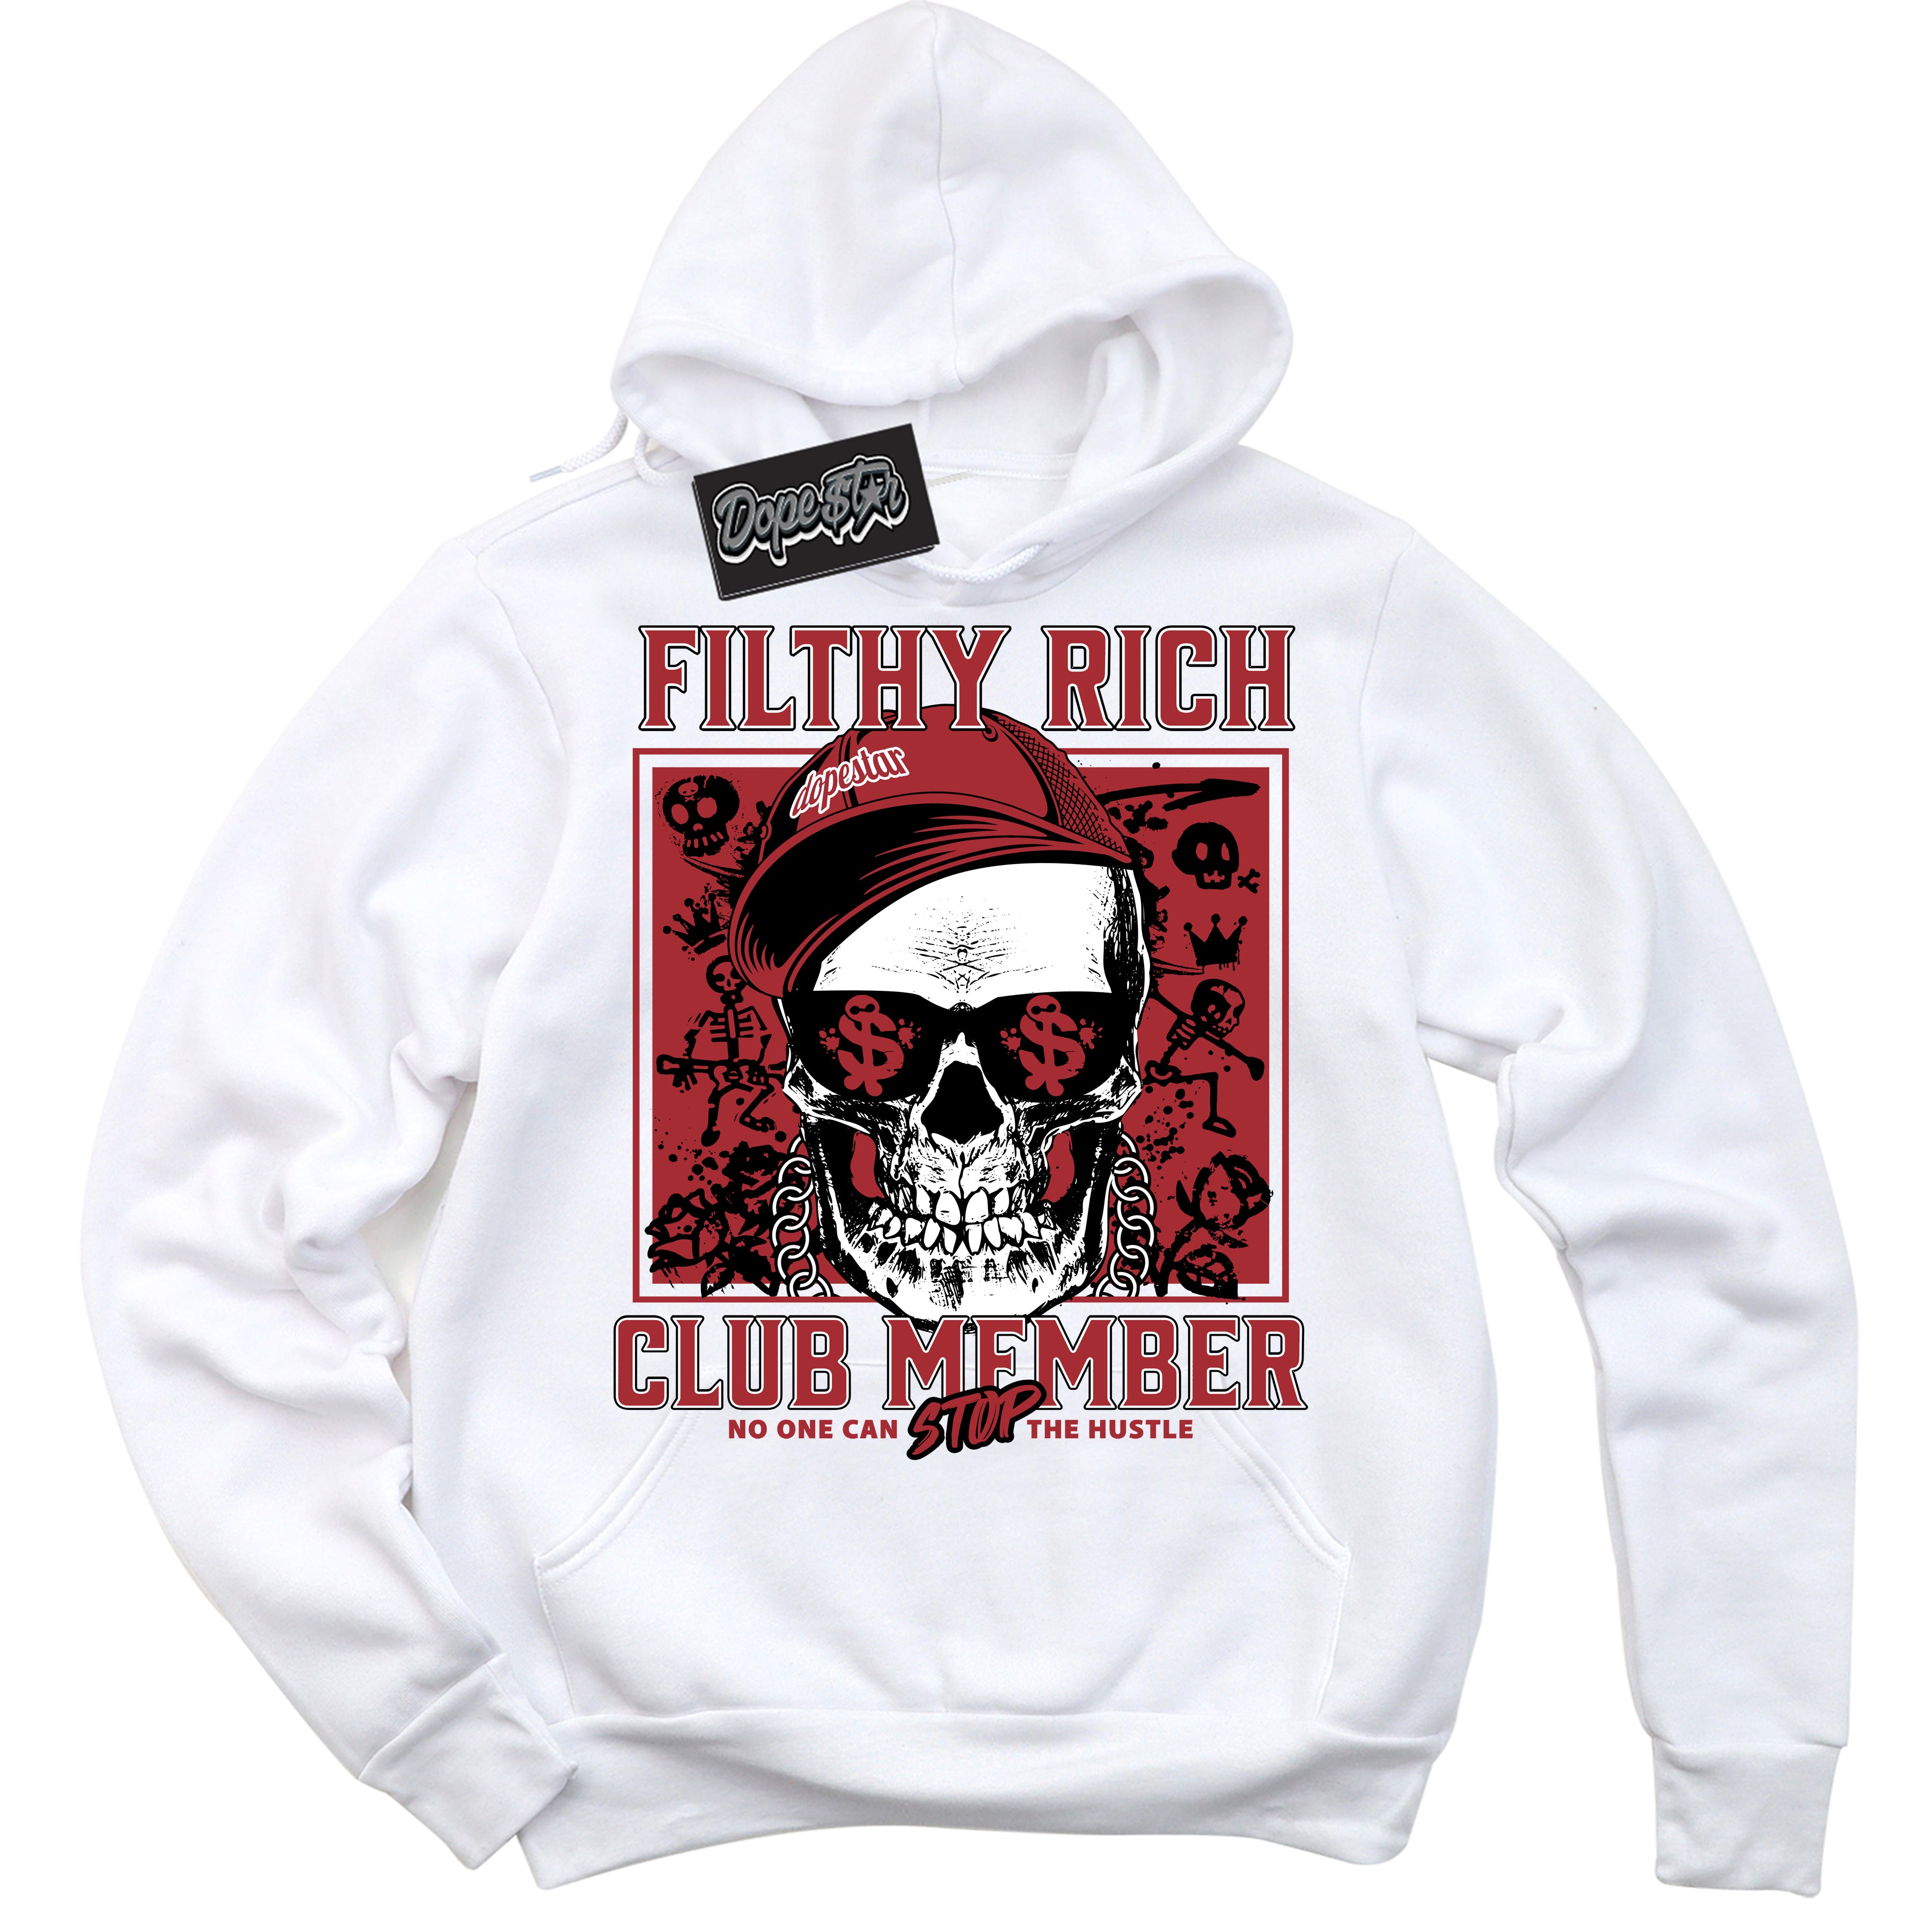 Cool White Hoodie with “ Filthy Rich ”  design that Perfectly Matches Pro J Pack Chicago Sneakers.